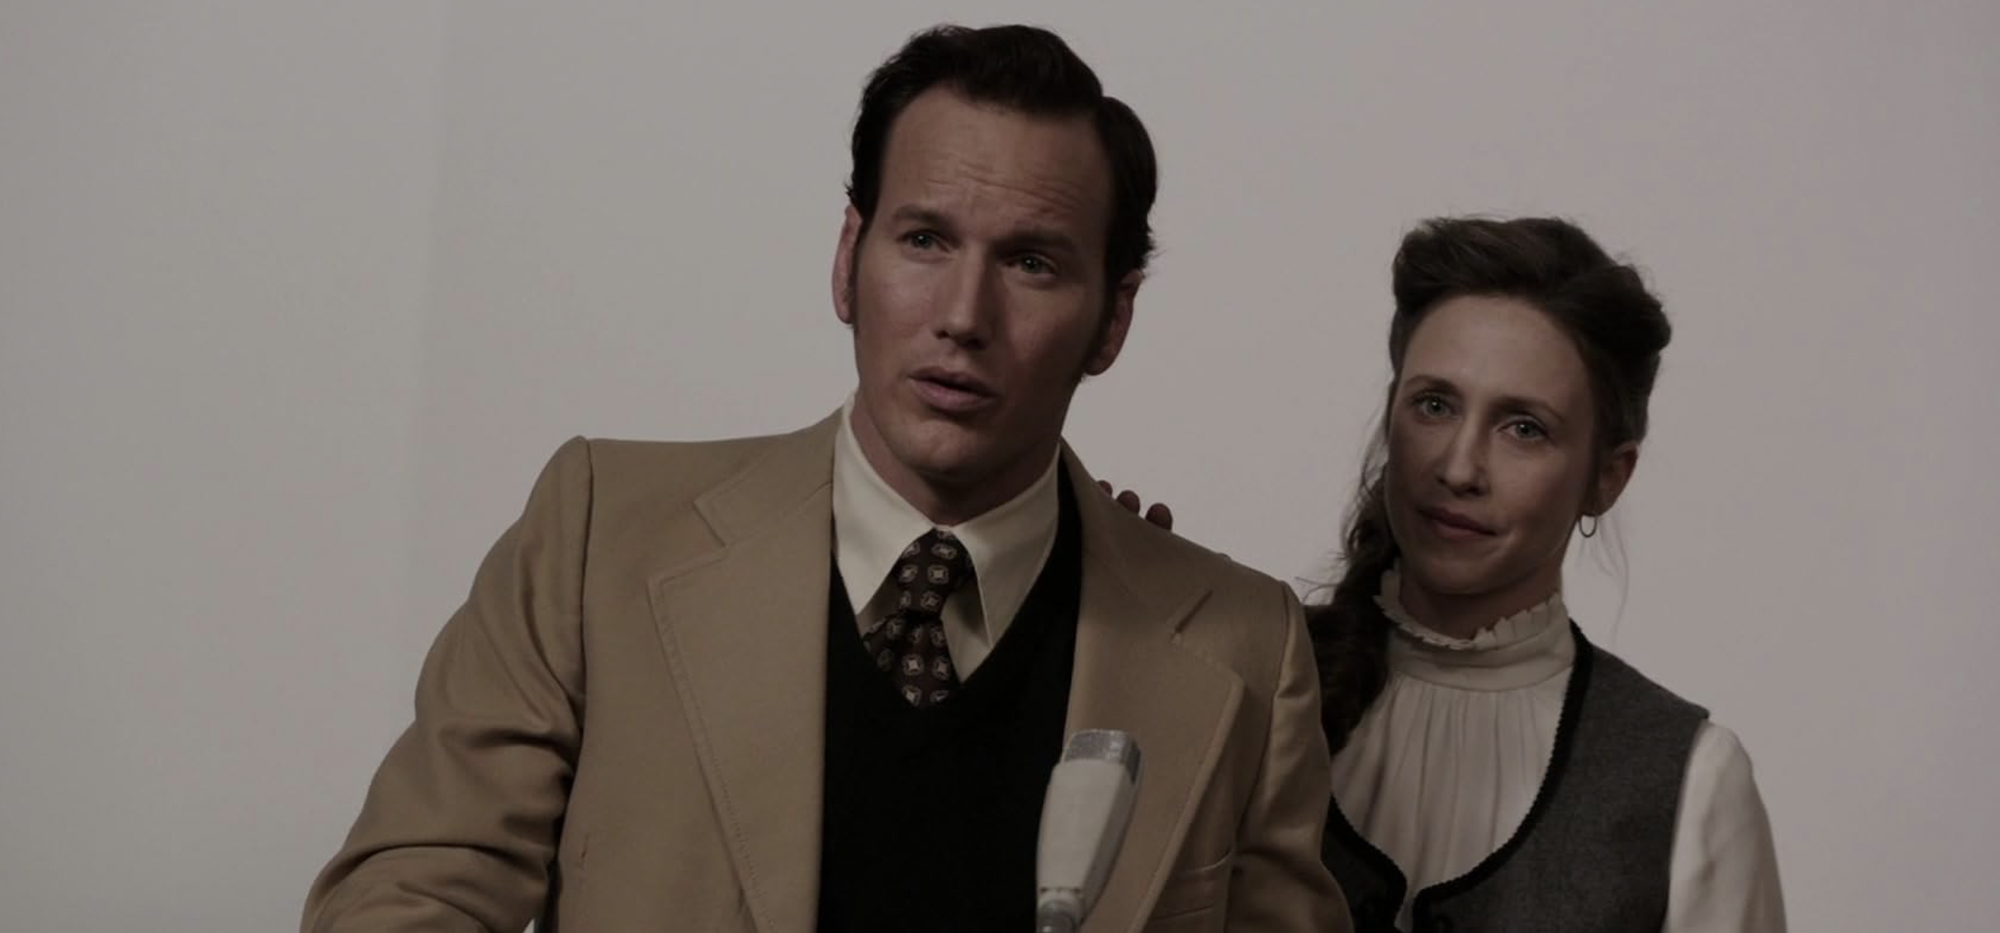 Patrick Wilson and Vera Farmiga as Ed and Lorraine Warren in 'The Conjuring'